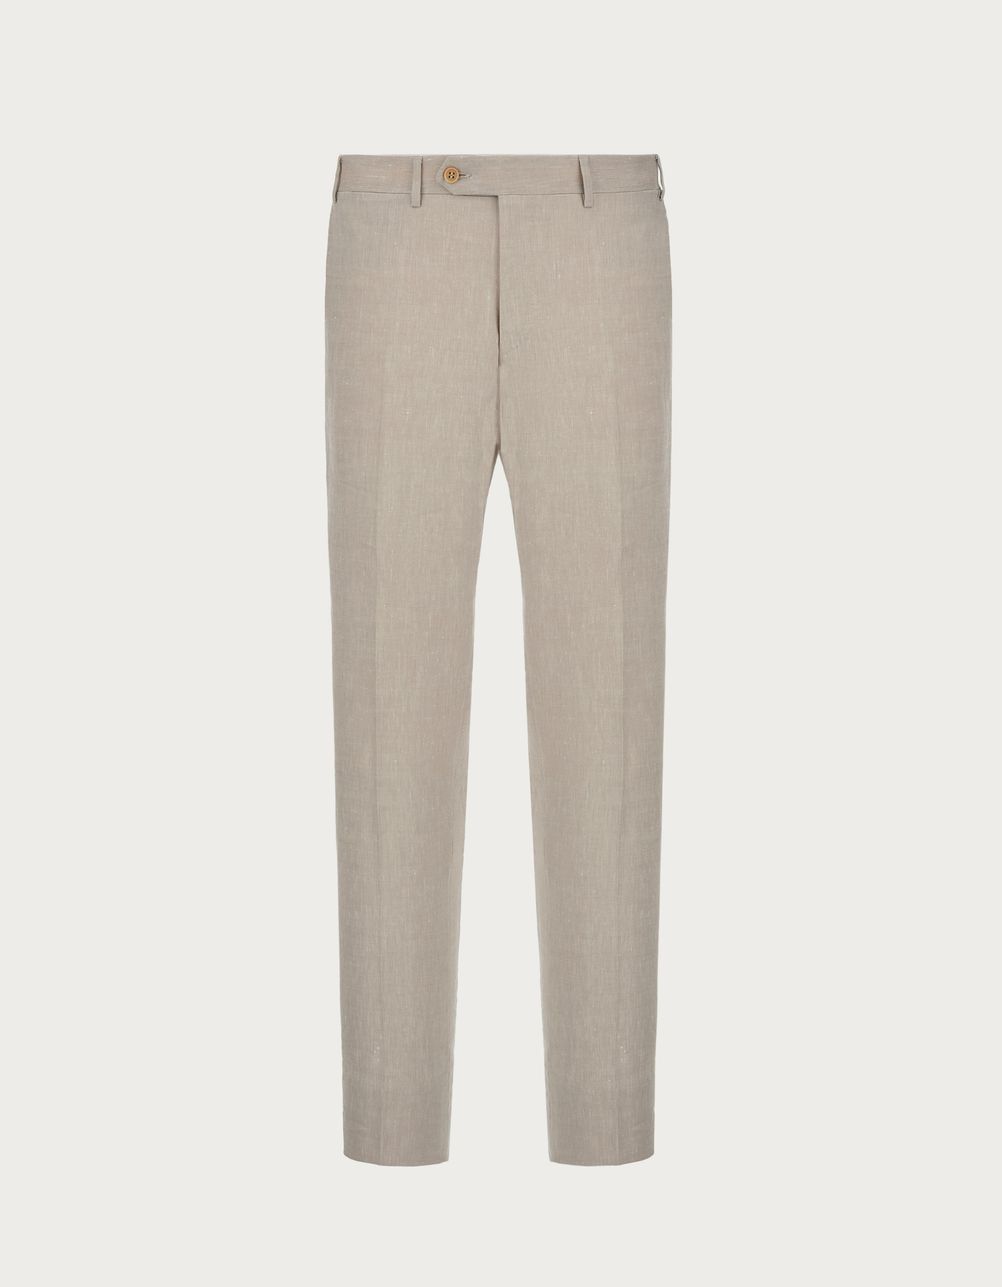 Natural pants in linen and wool